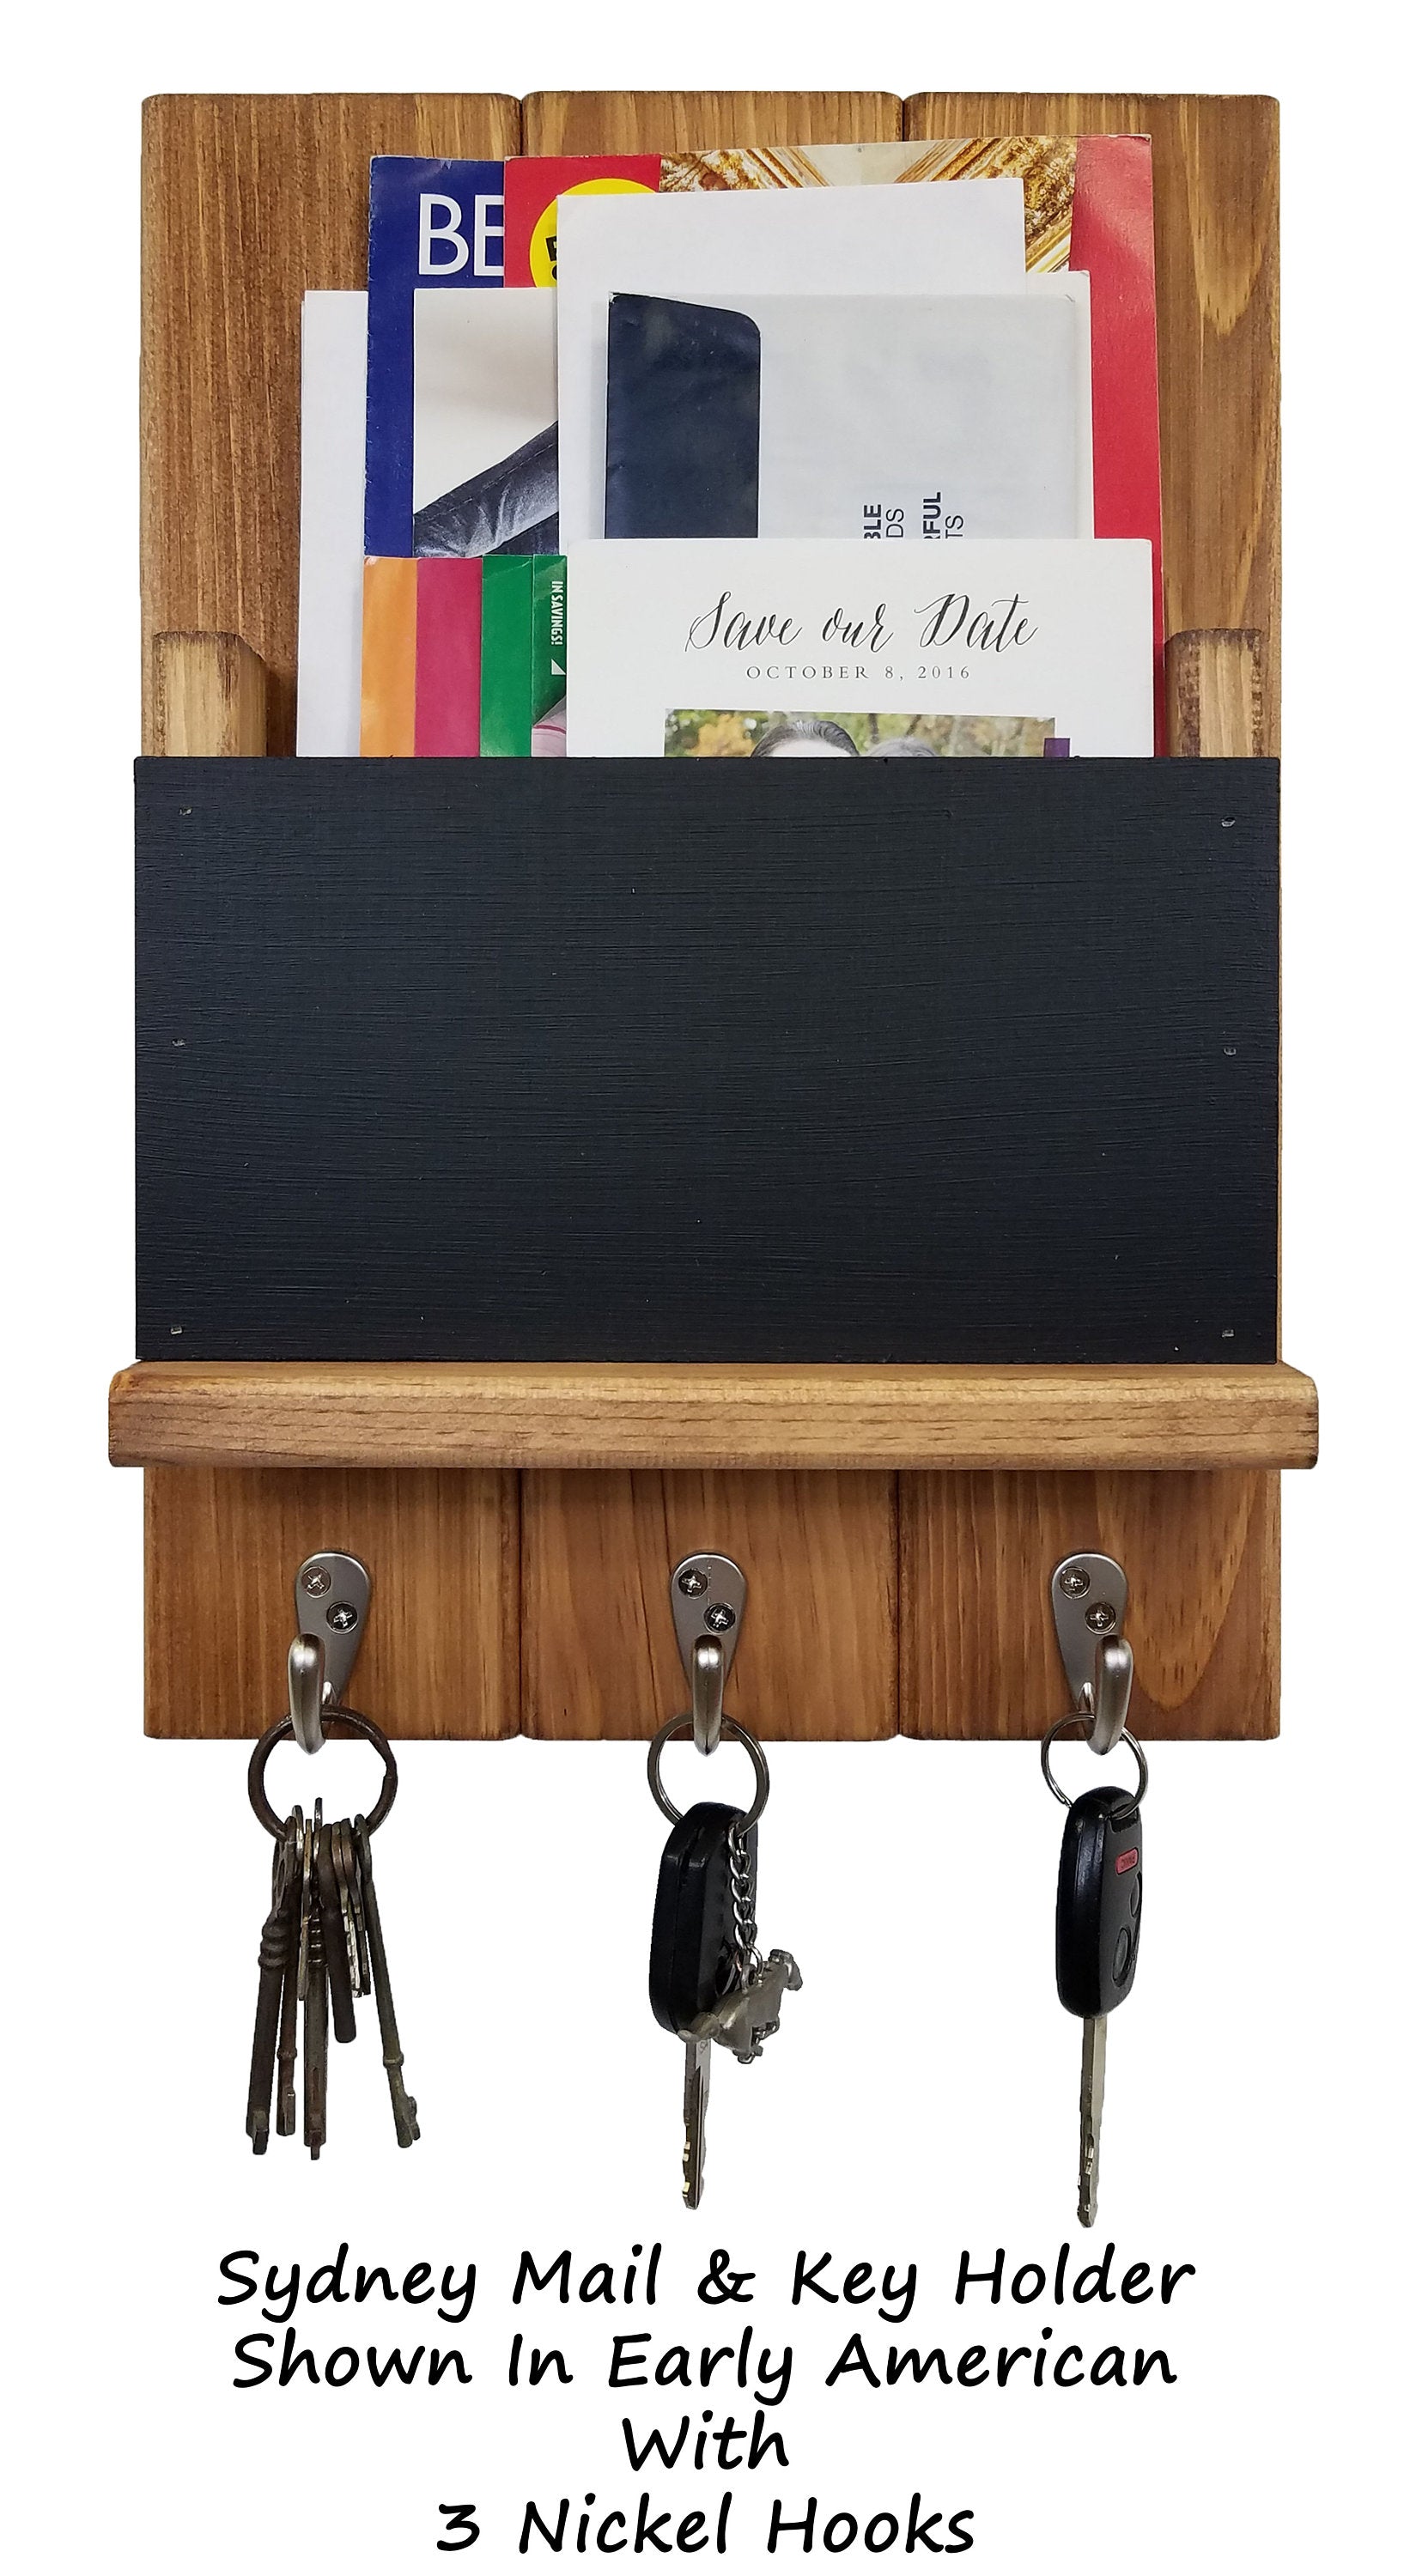 Chalkboard Front Sydney Mail Slot with Hooks, 20 Stain Colors, Shown in Early American, Nickel Hooks